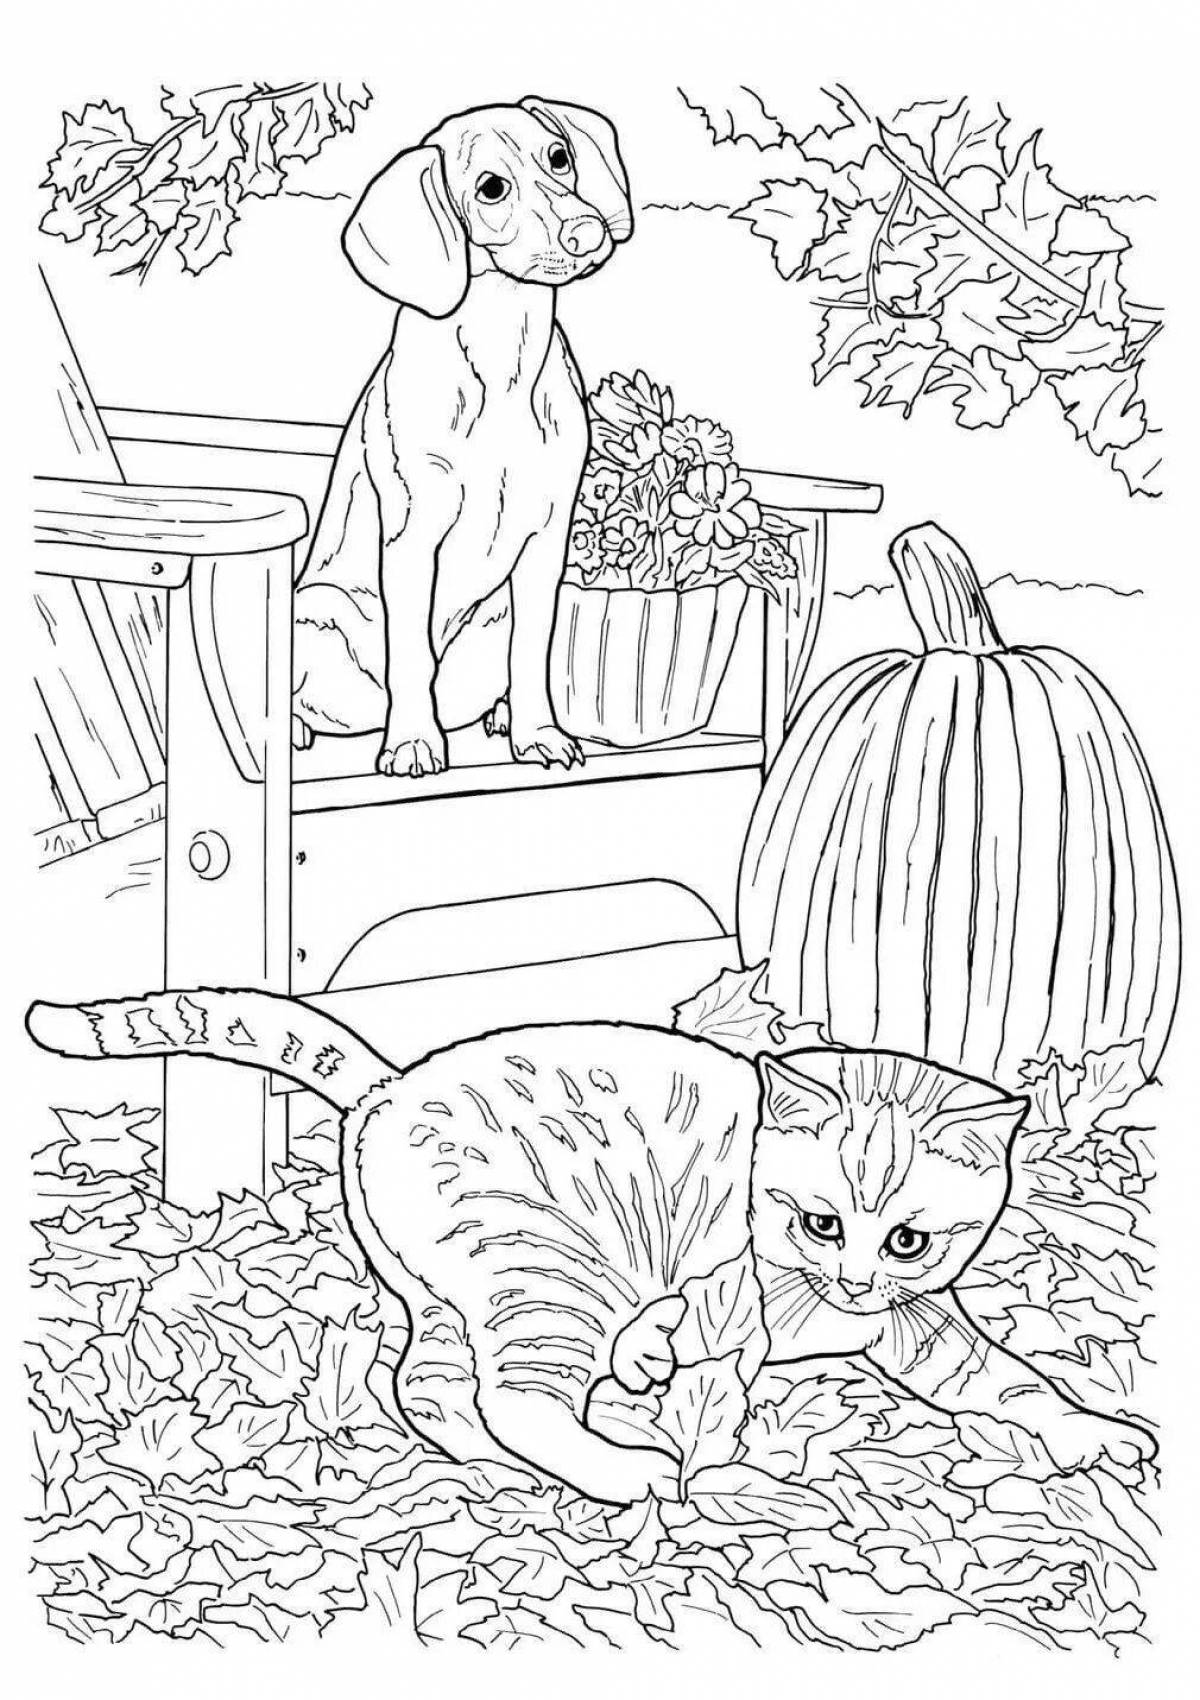 Fluffy coloring book pets cat dog